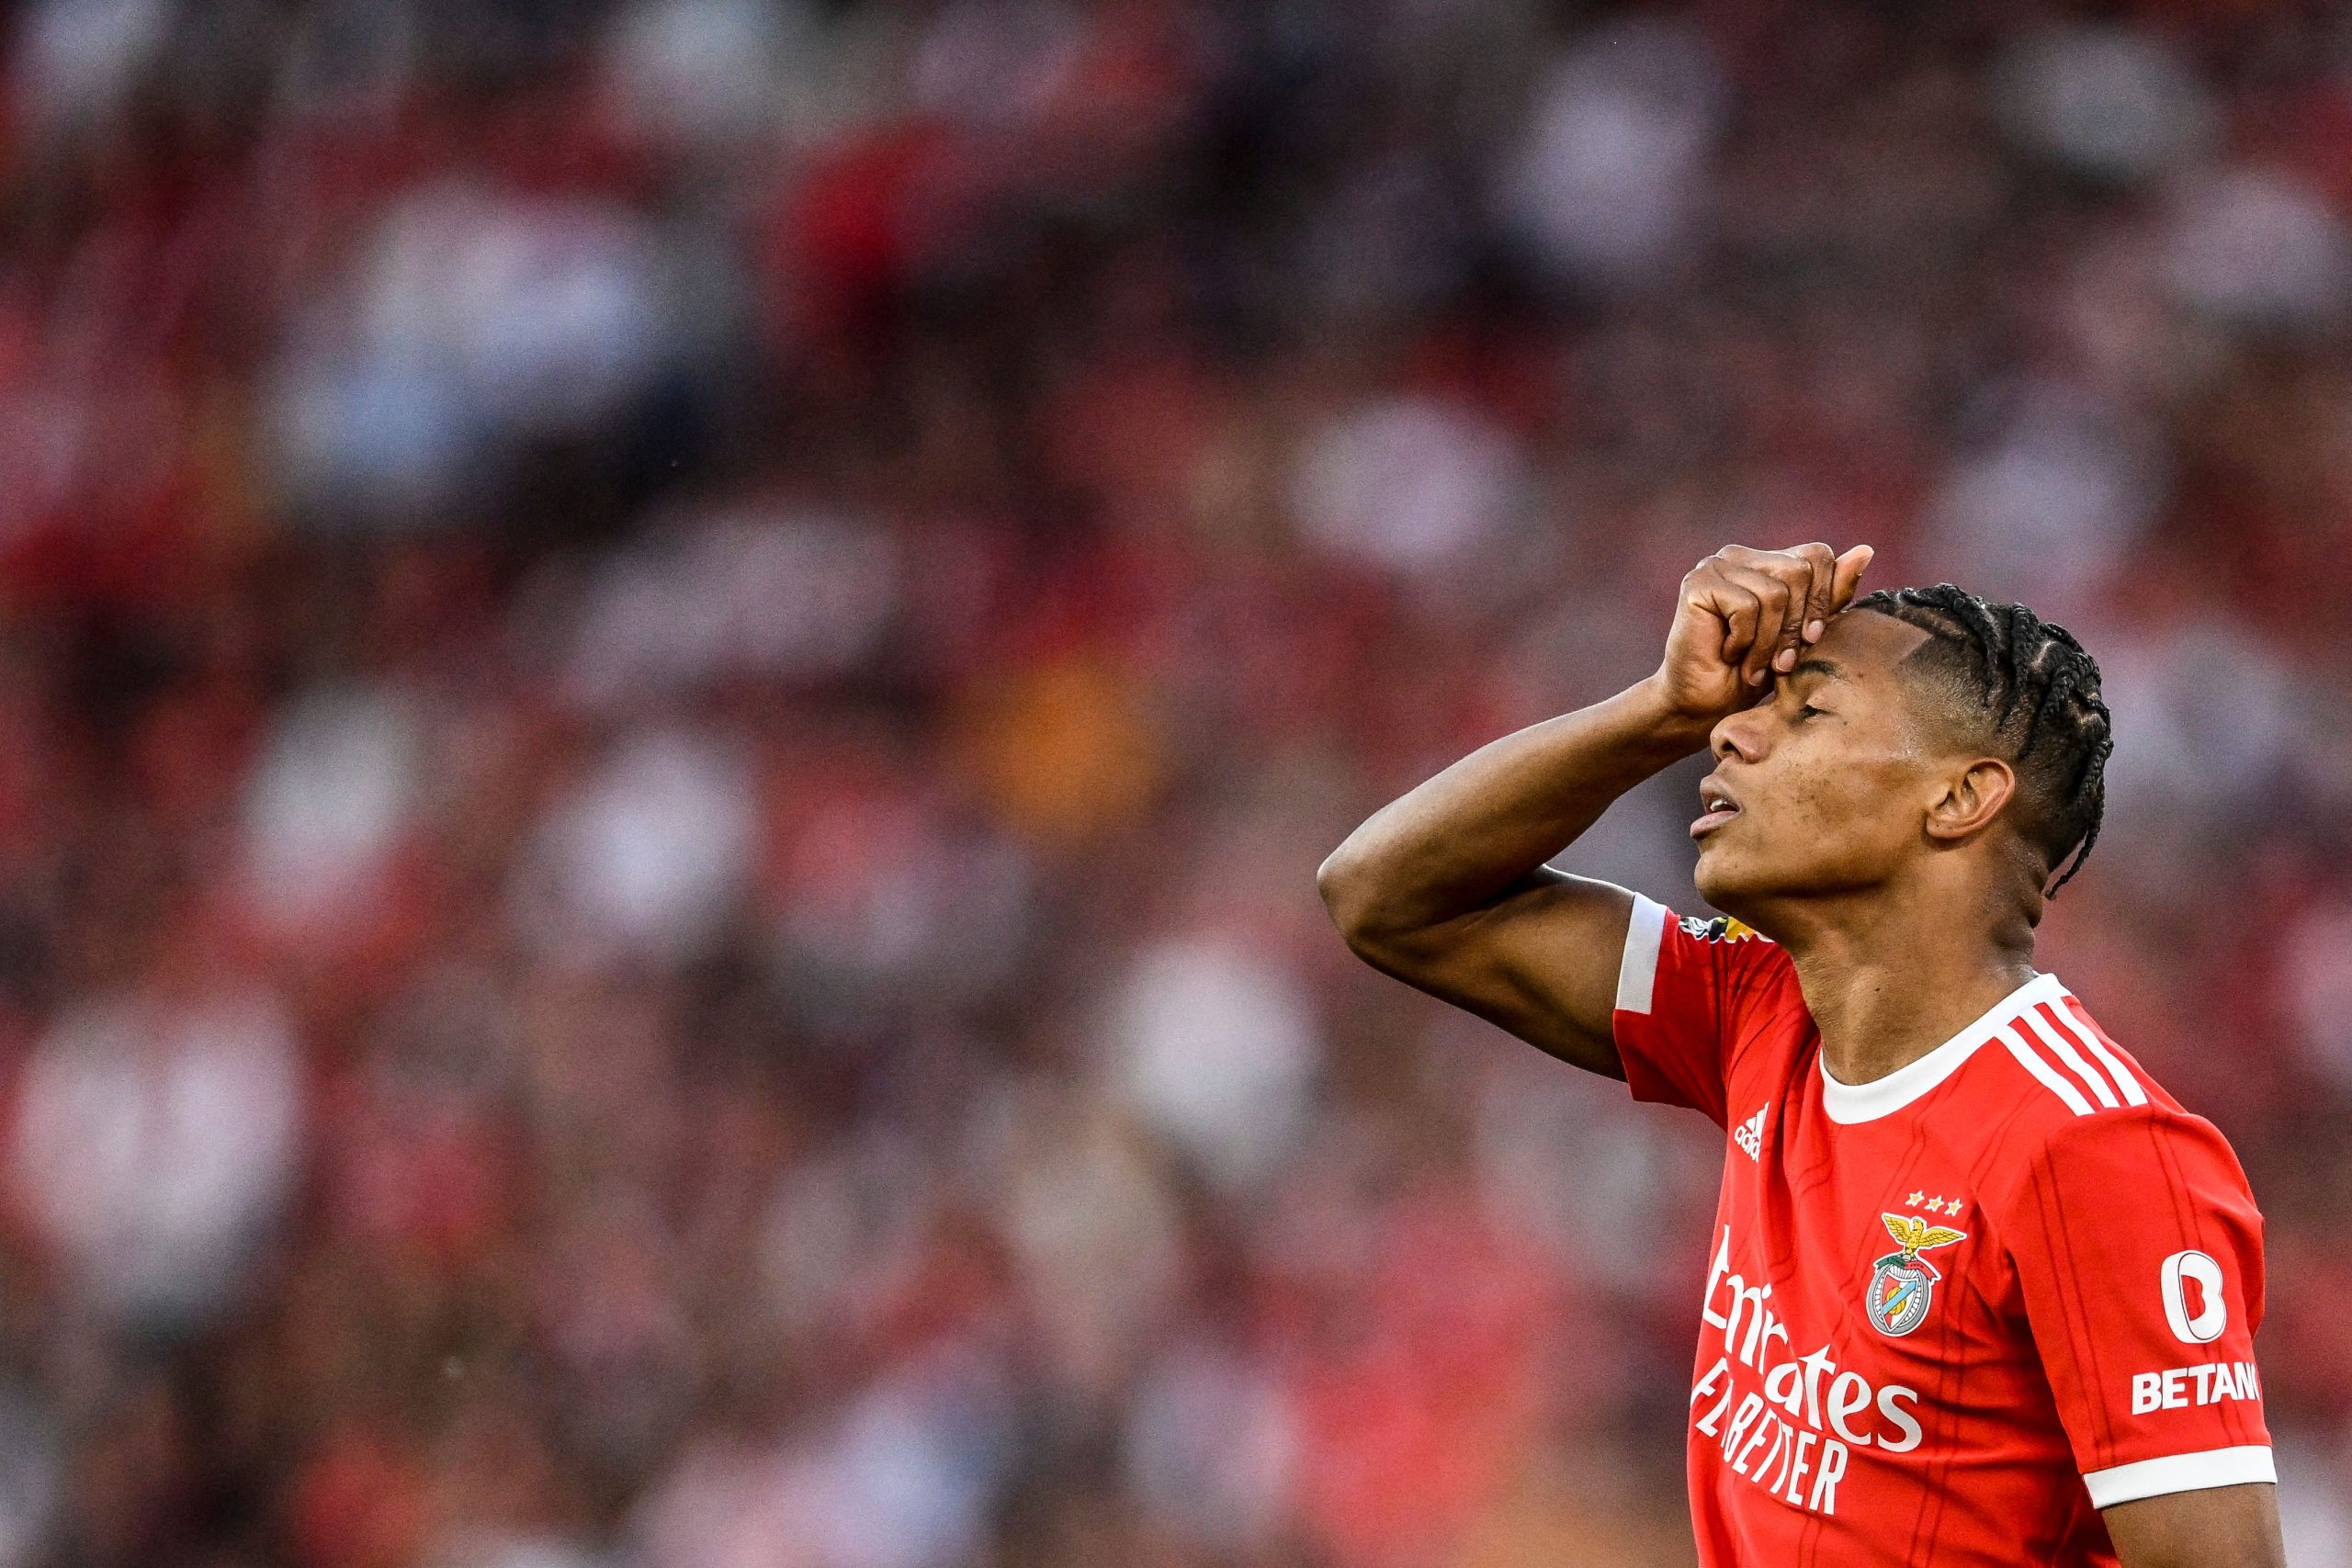 Porto will file a complaint against Benfica player David Neres